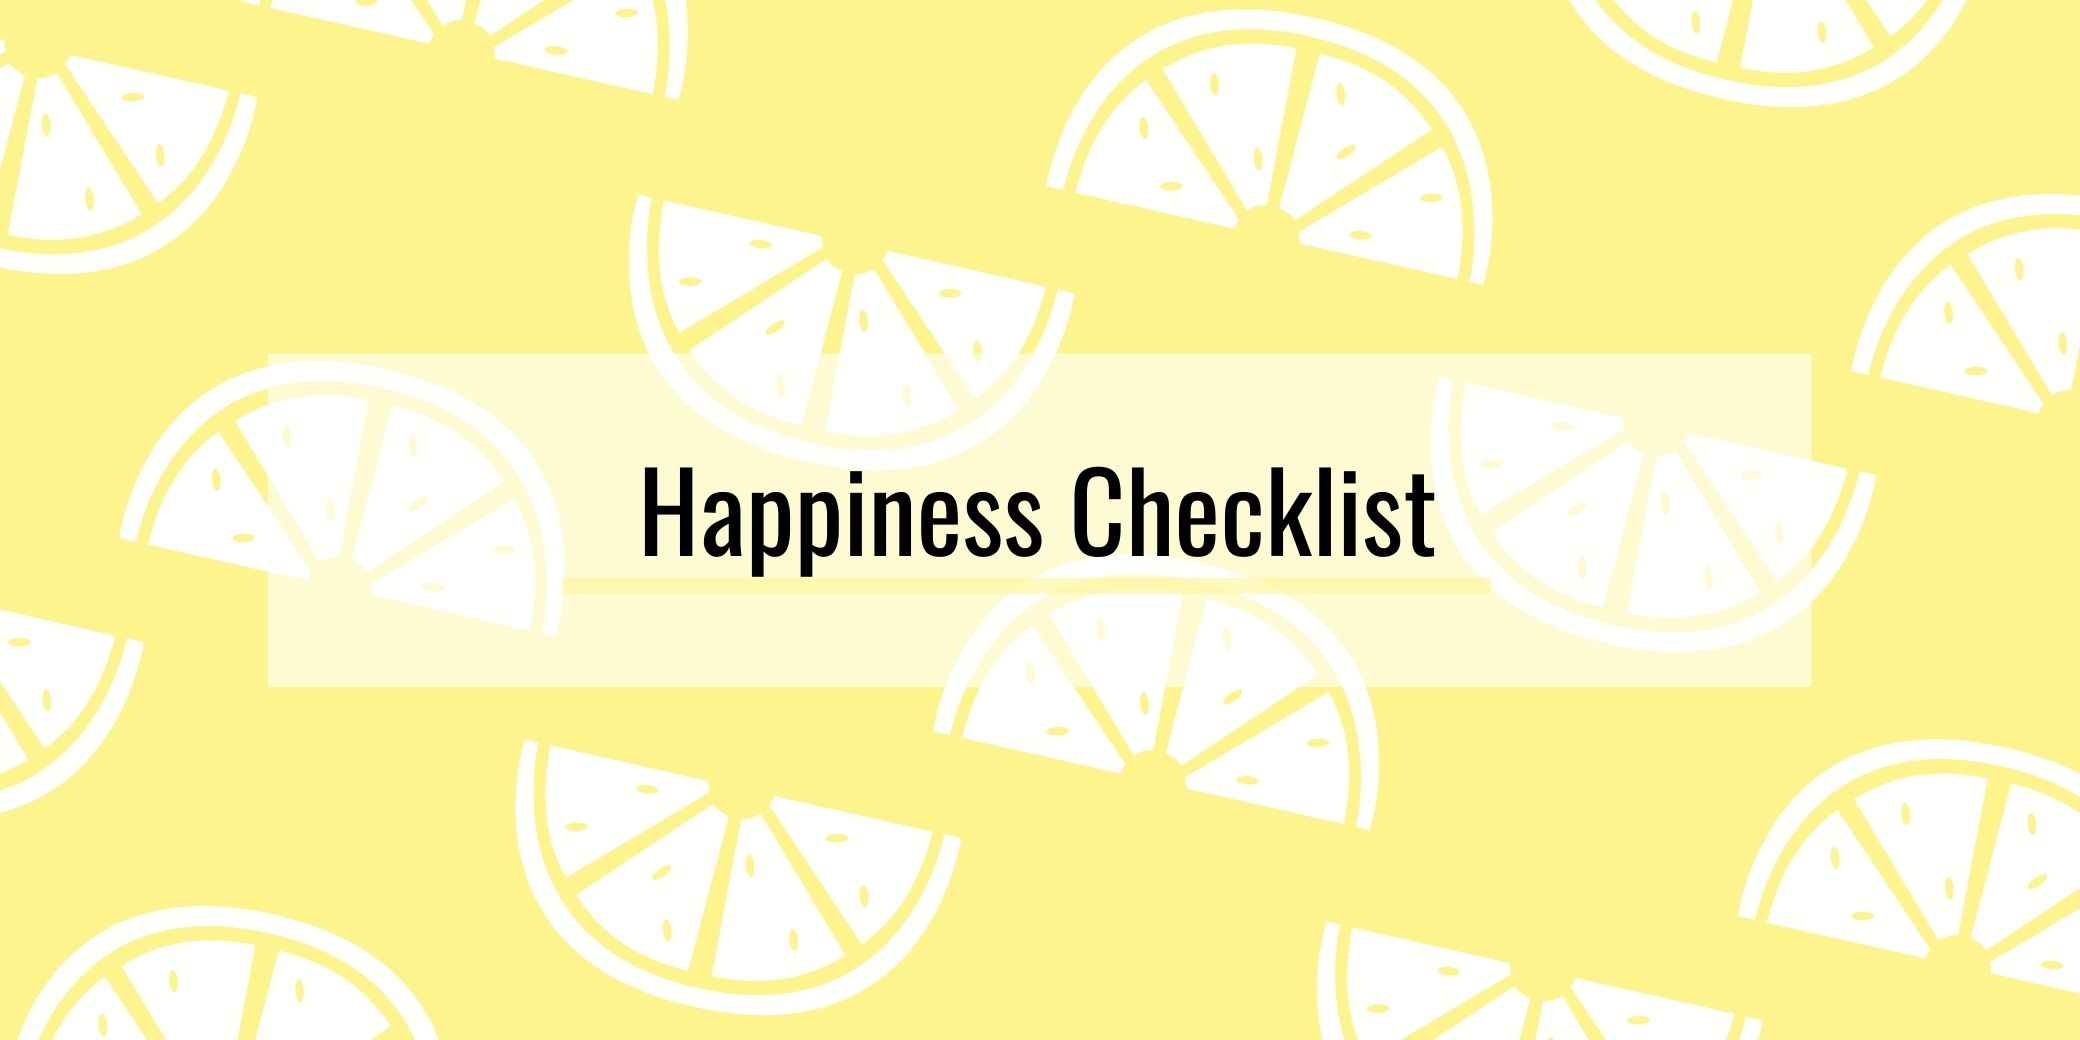 (Featured Image) Happiness Checklist